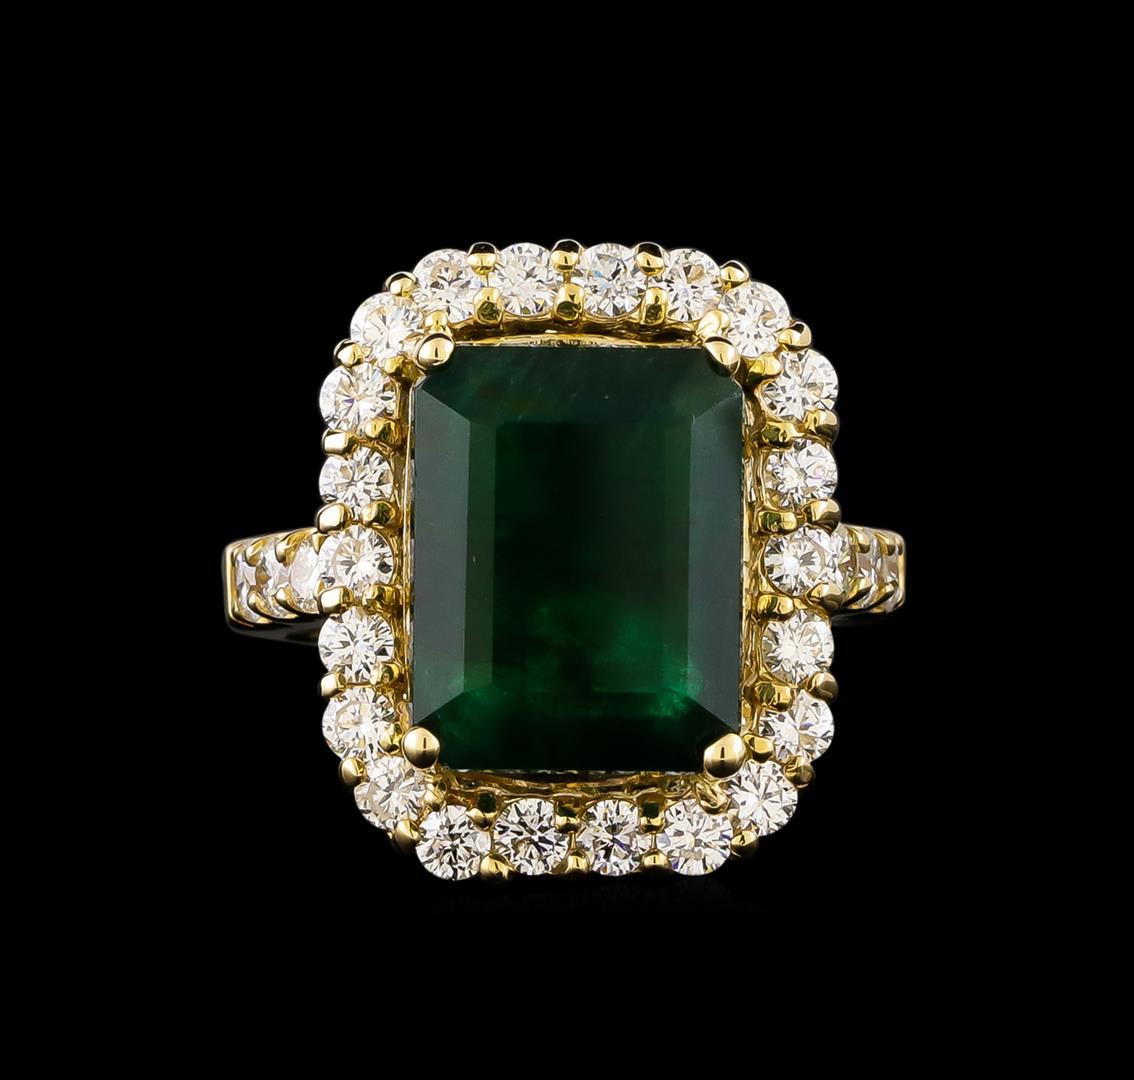 14KT Yellow Gold 6.96 ctw Emerald and Diamond Ring